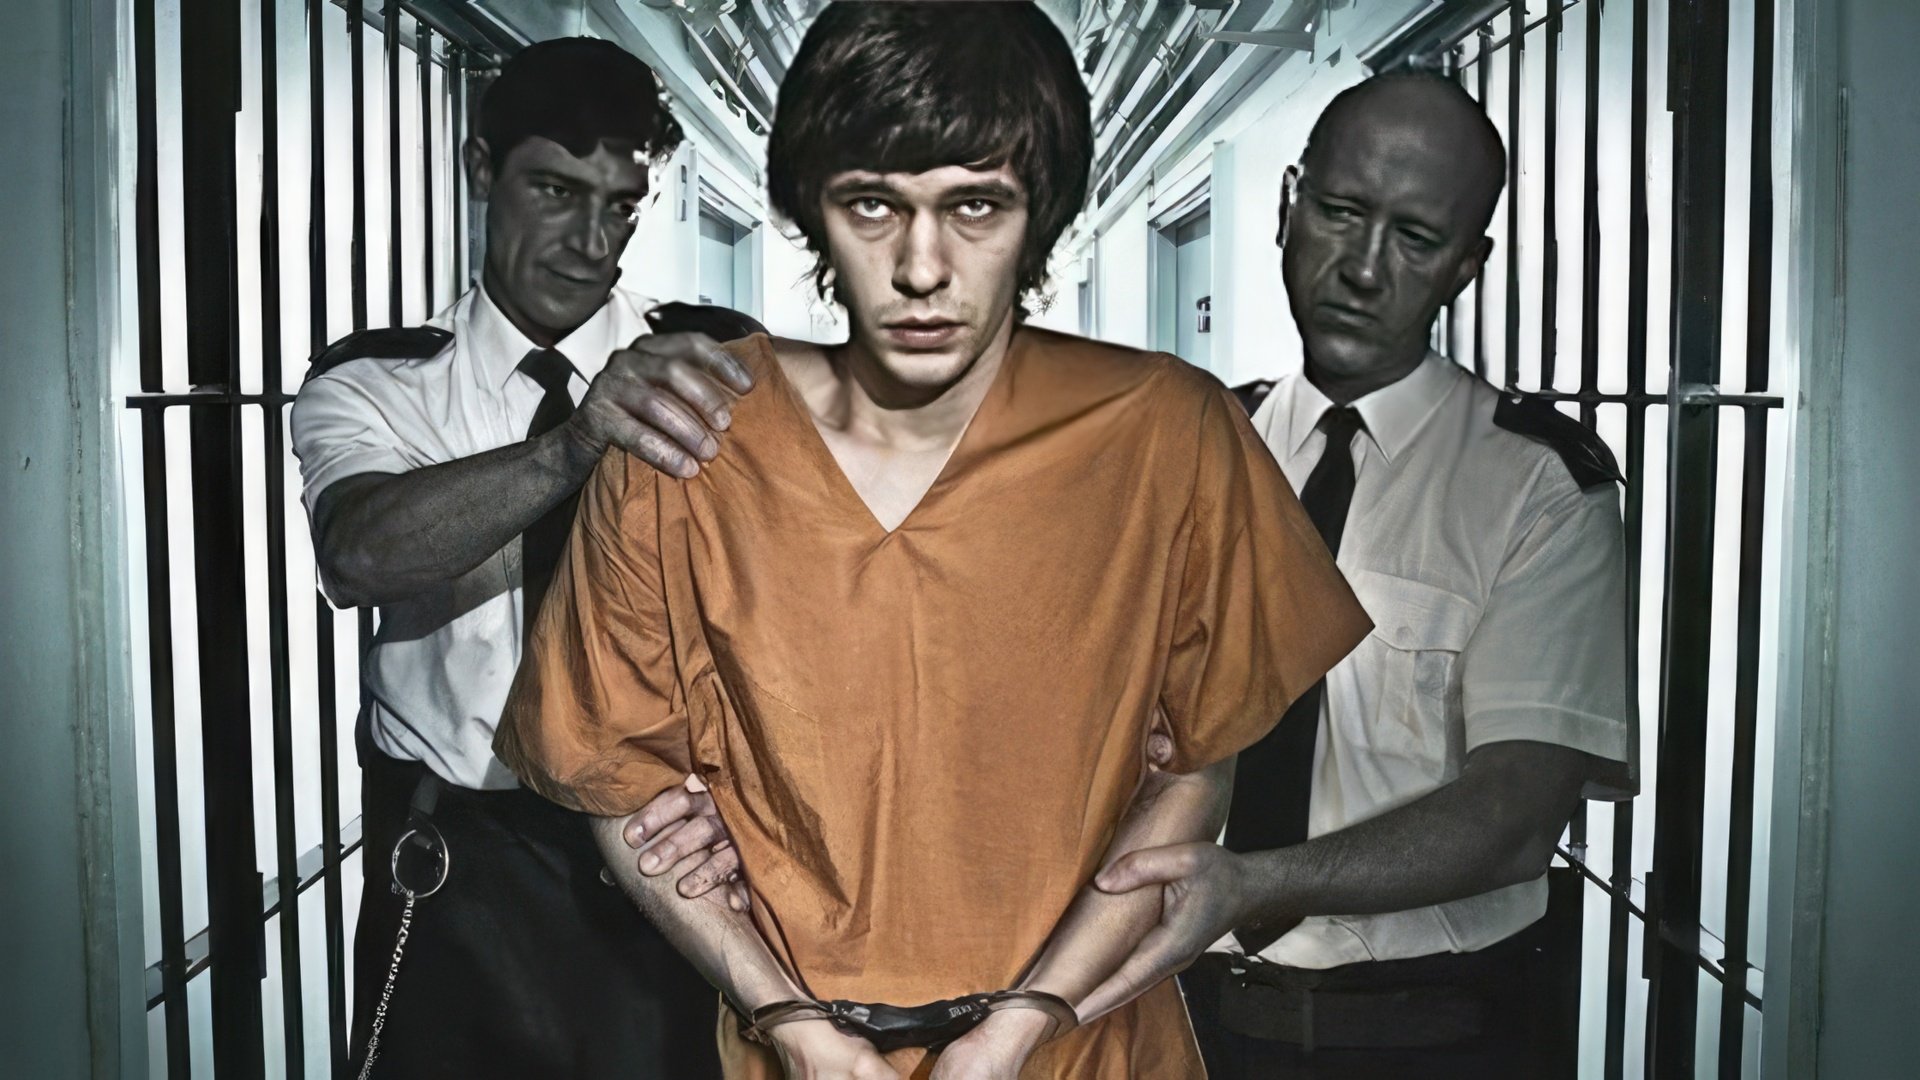 Ben Whishaw in the series Criminal Justice